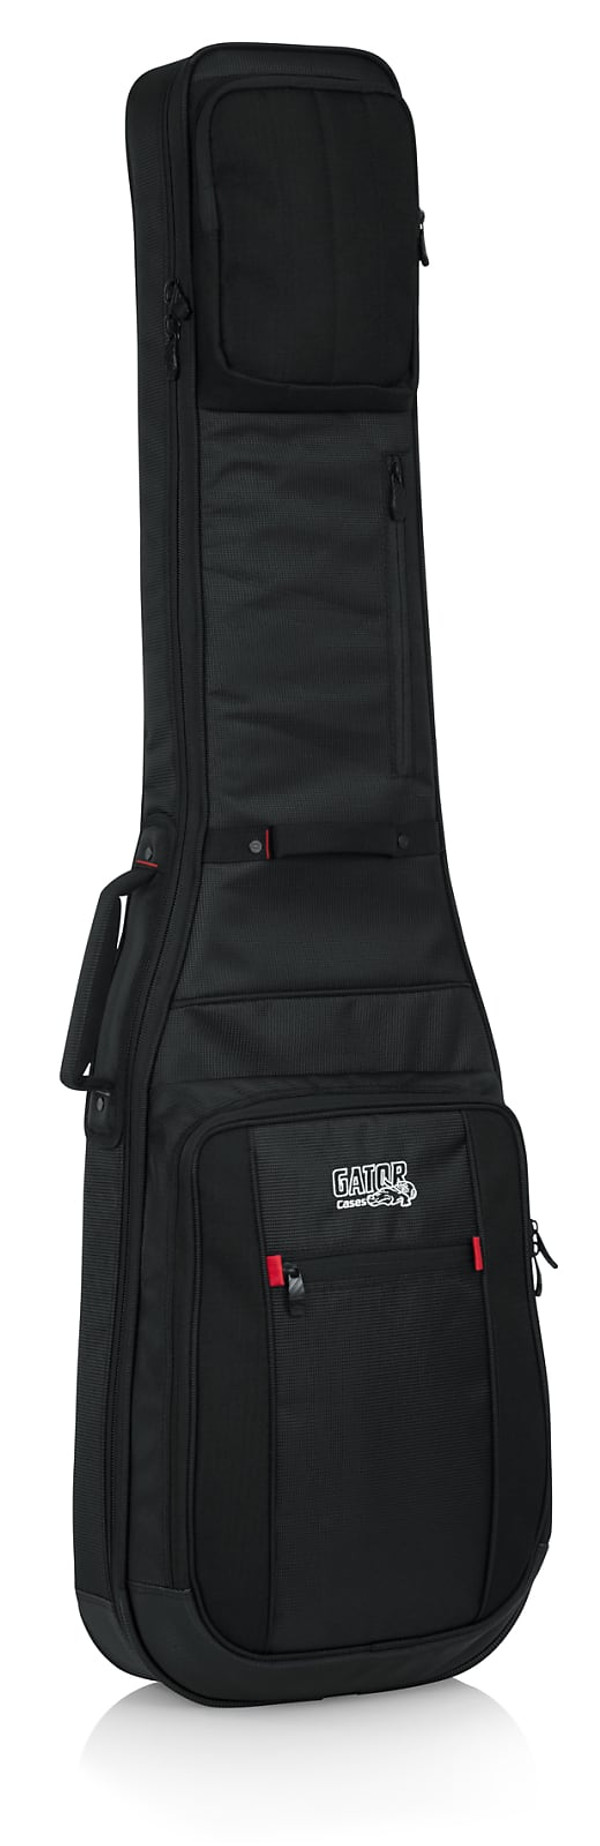 Gator Pro-Go Series Bass Guitar Bag with Micro Fleece Interior and Removable Backpack Straps